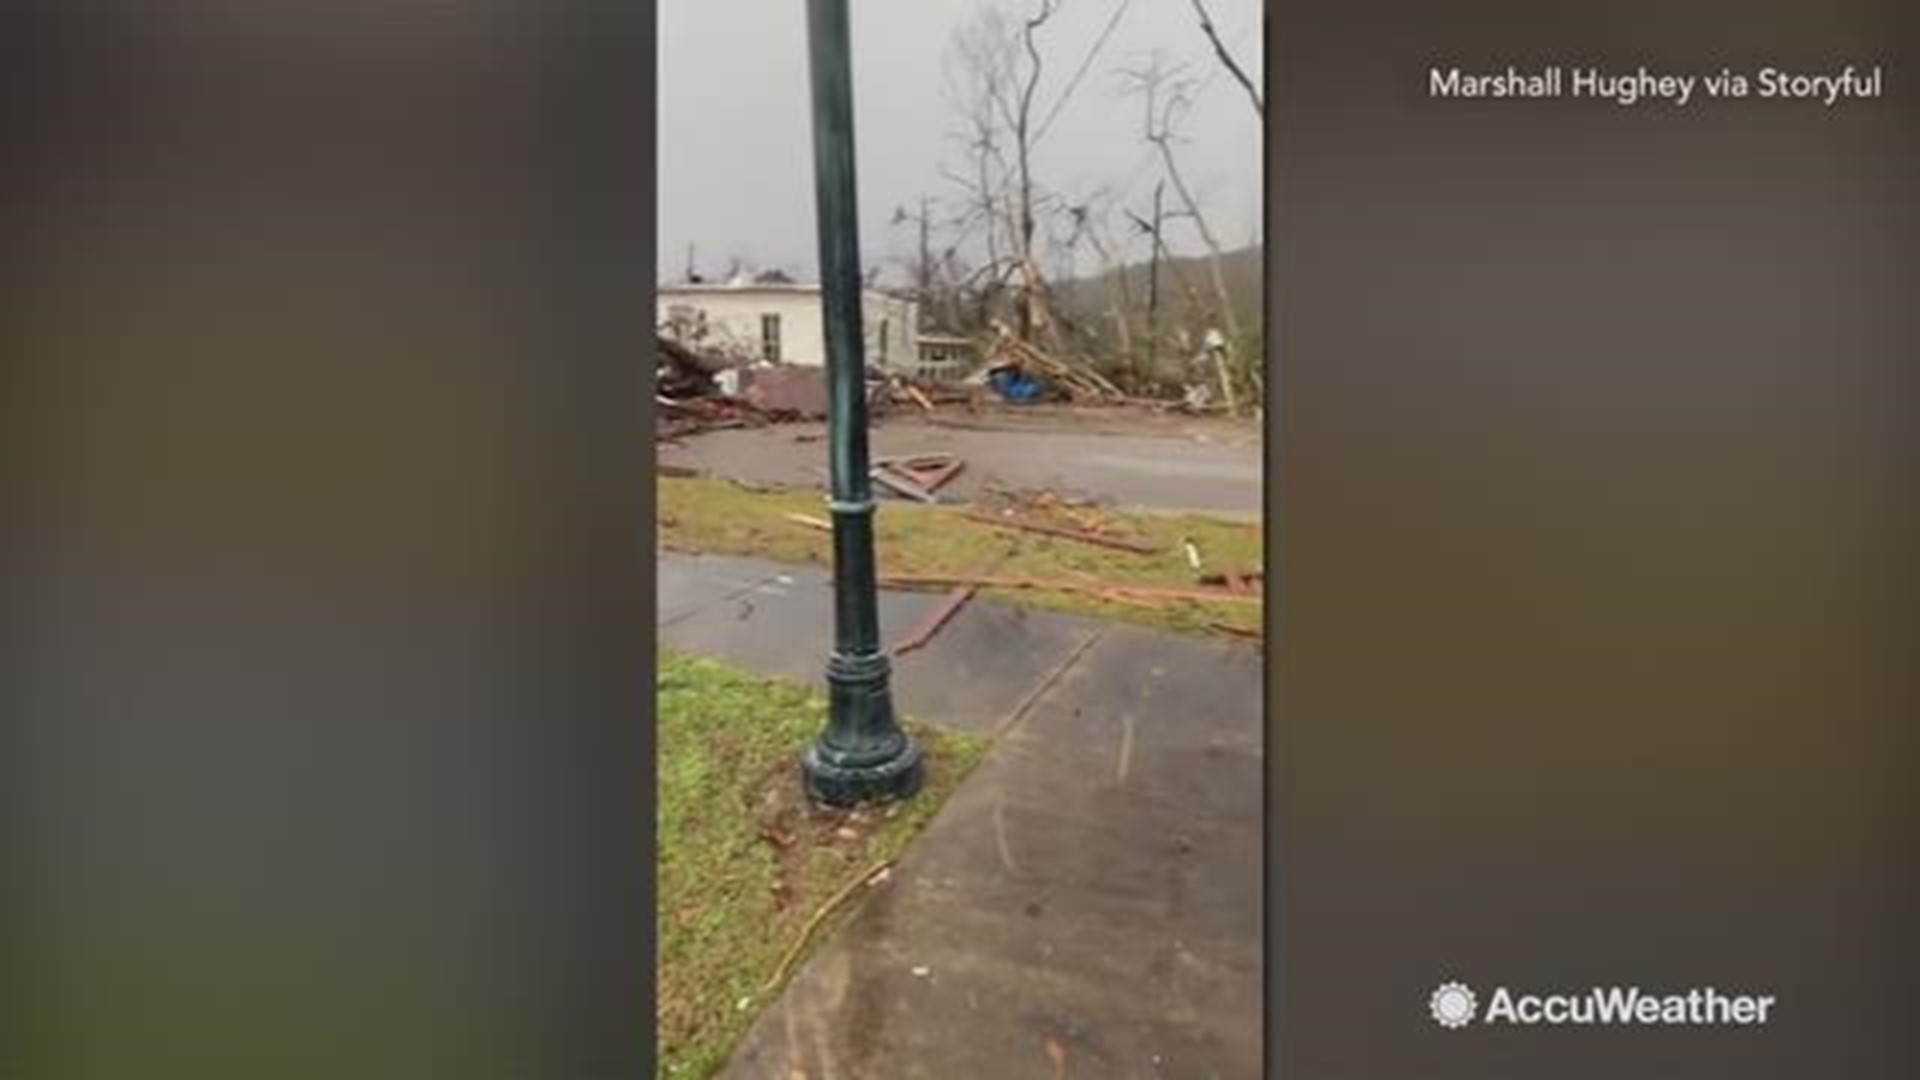 A tornado tore through Wetumpka, Alabama on Jan. 19 leaving behind significant damage to structures and vehicles.  No fatalities have been reported.